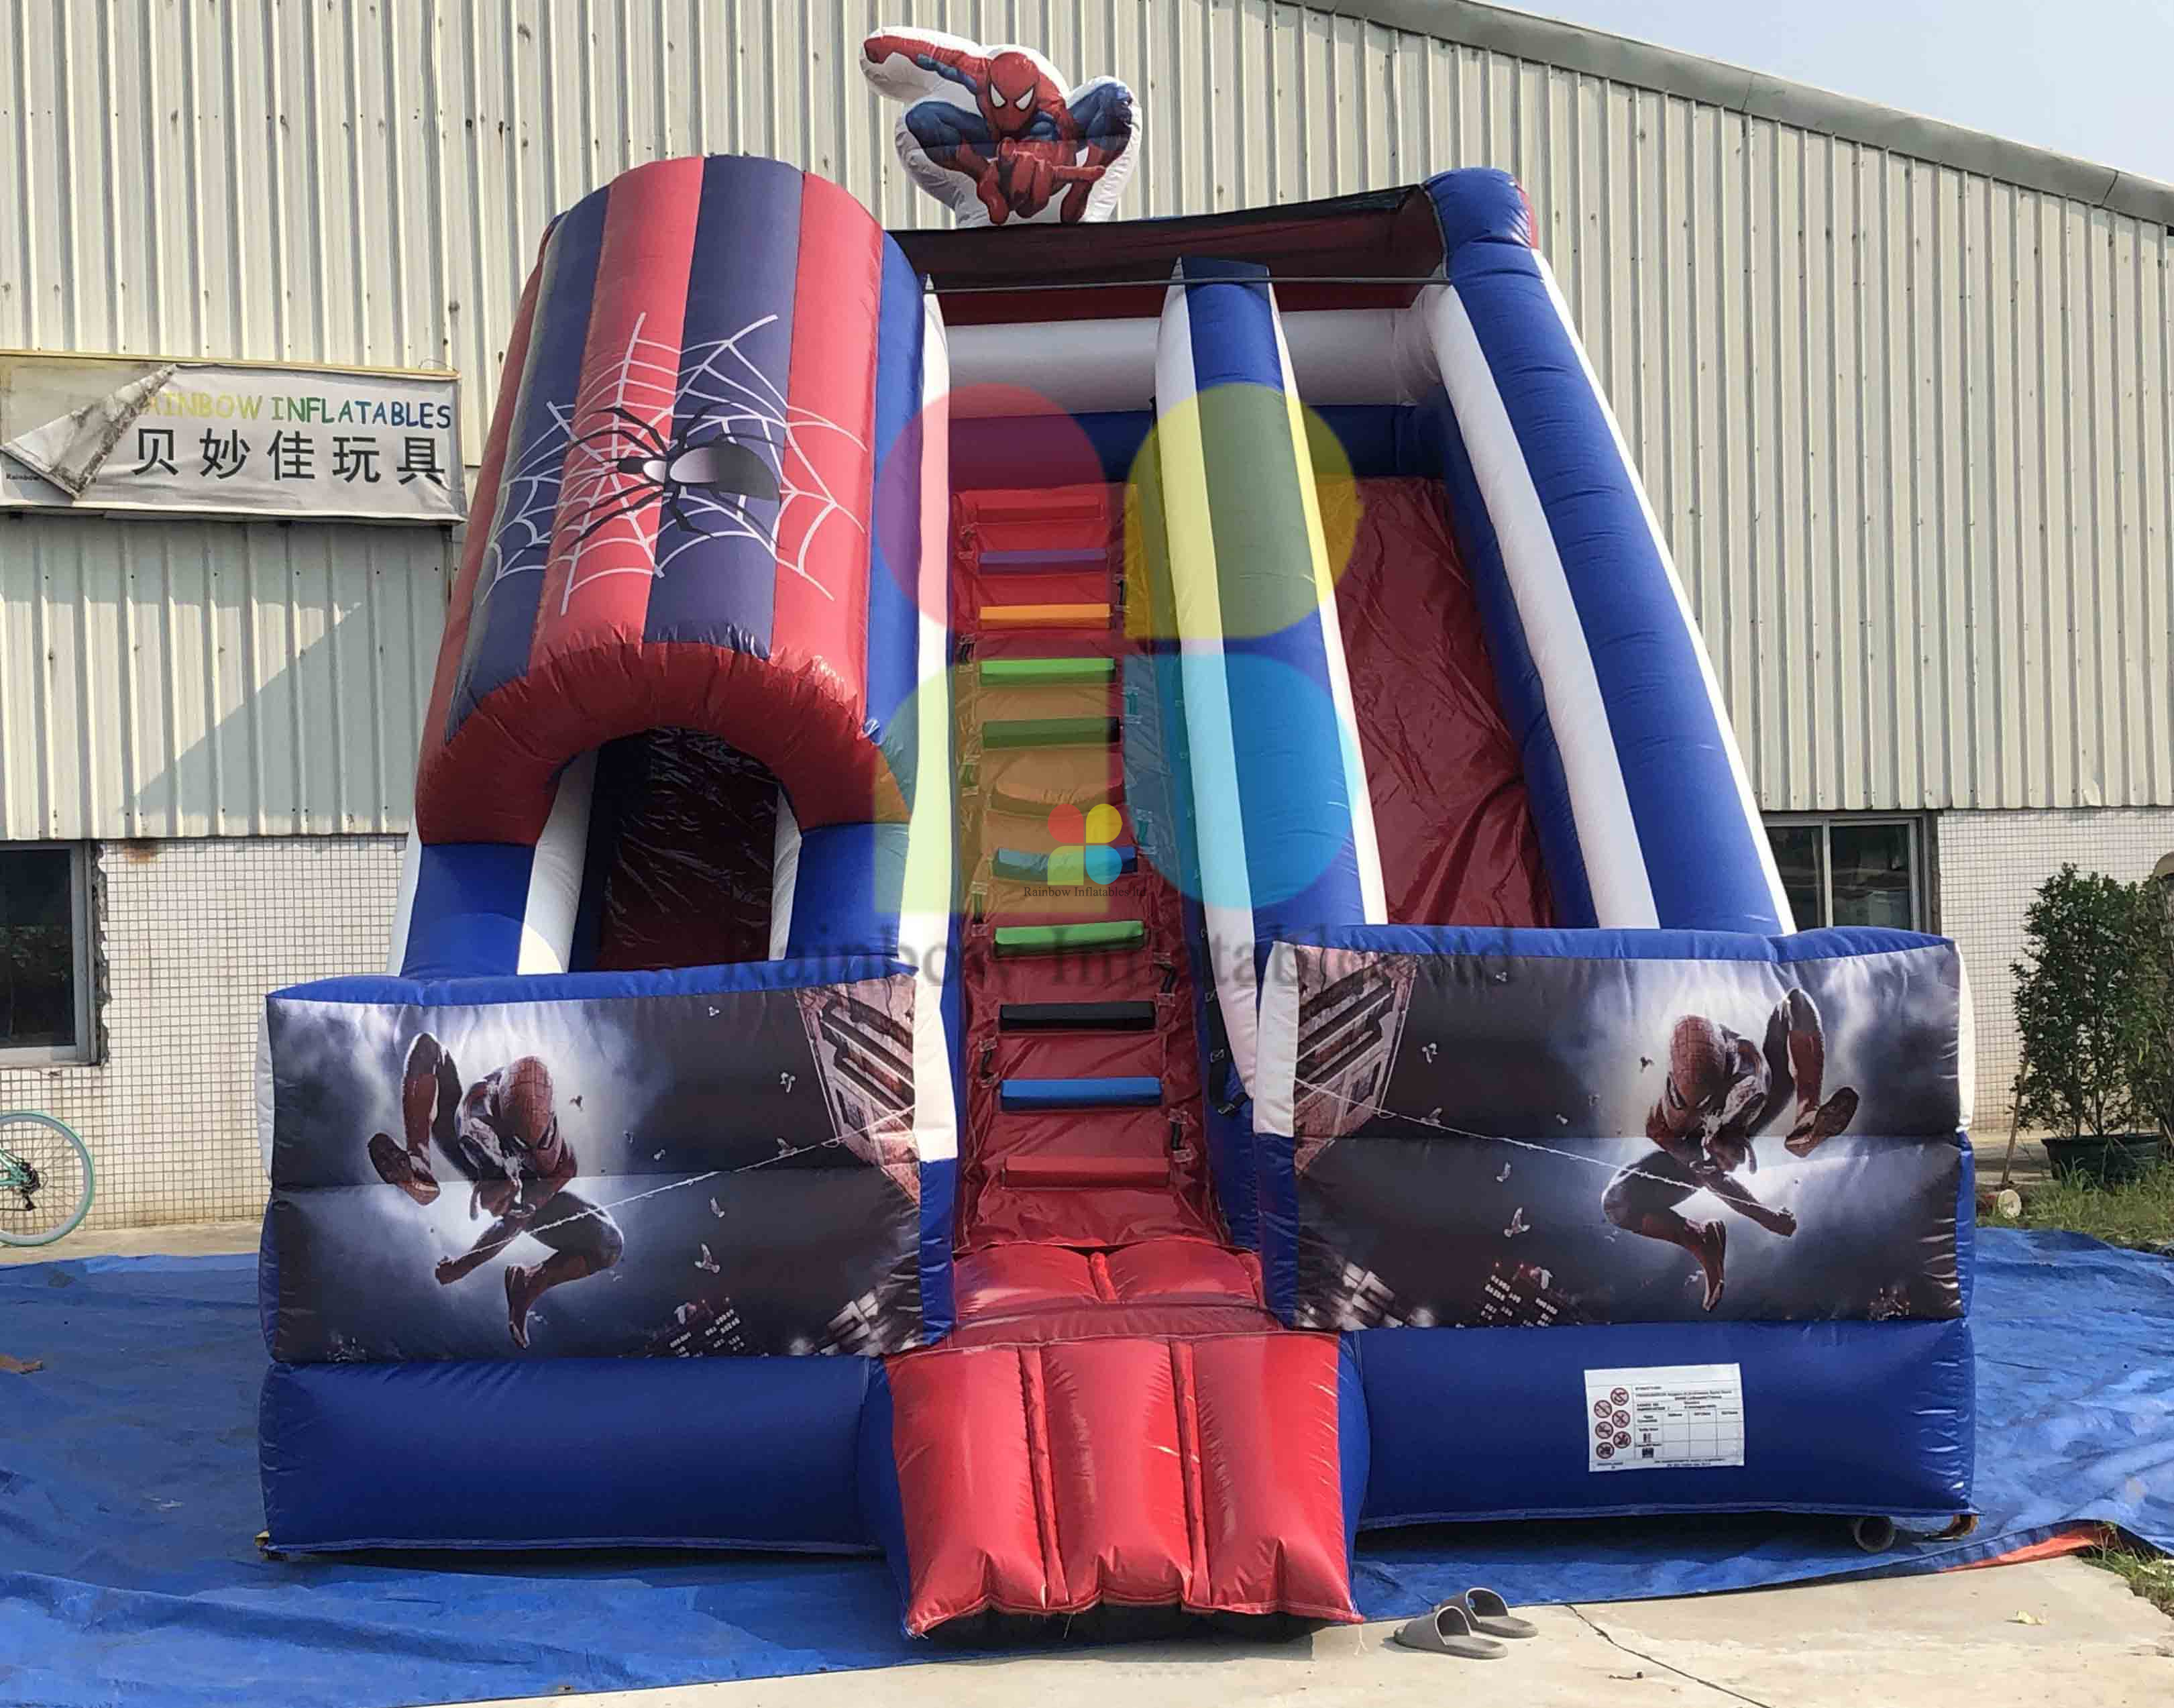 New Style Giant Commercial Inflatable Spiderman Slide Cartoon Inflatable Slide for Sale,Inflatable Cute Slide for Kids 